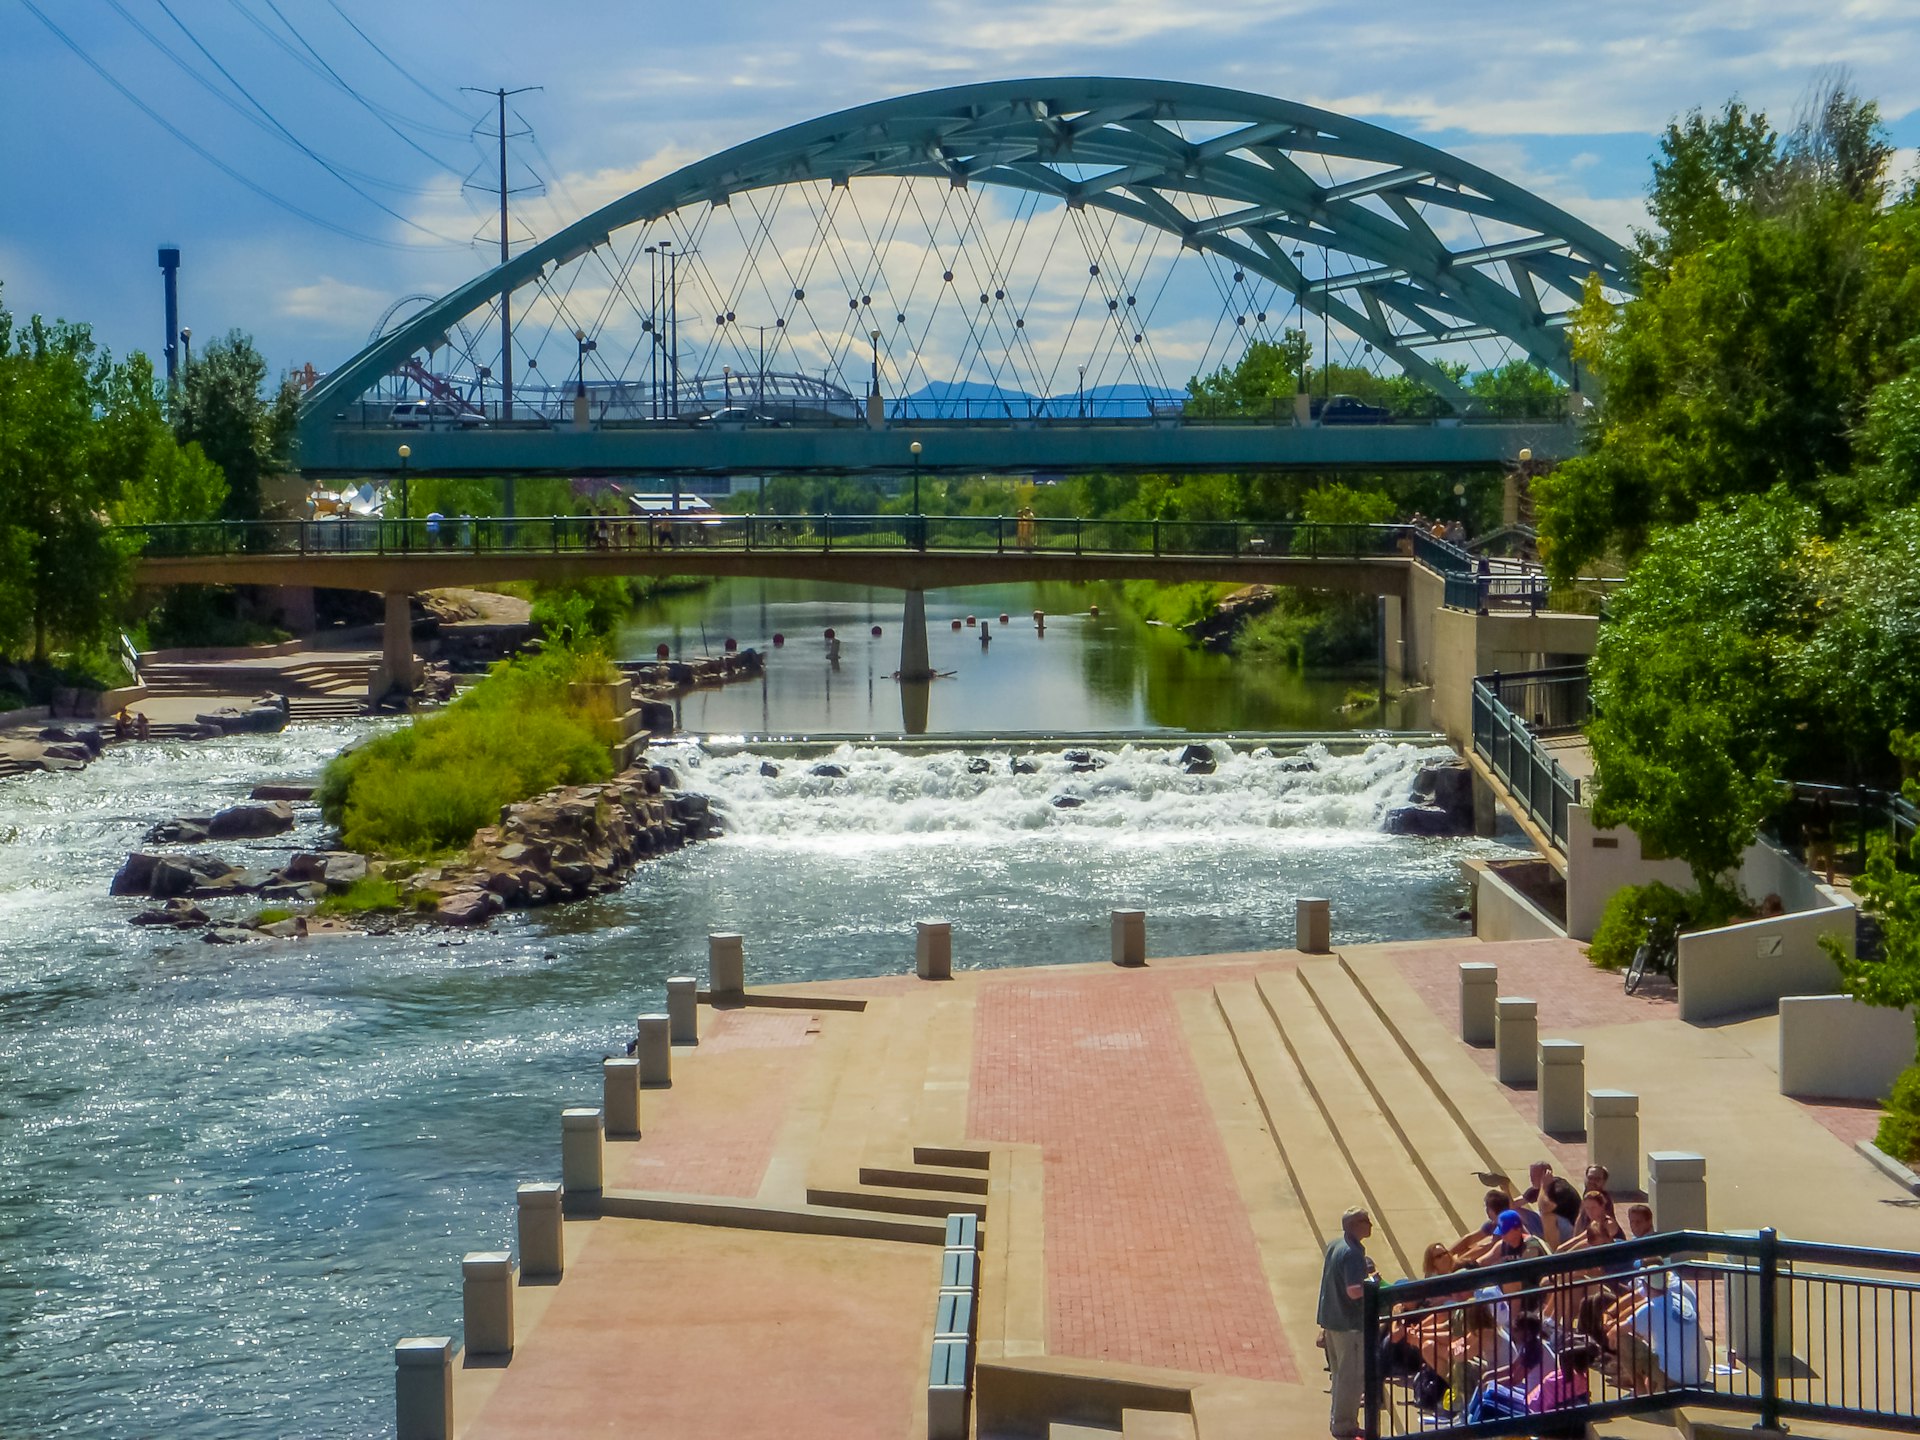 Visitors enjoy the views of Confluence Park in the heart of Denver, Colorado